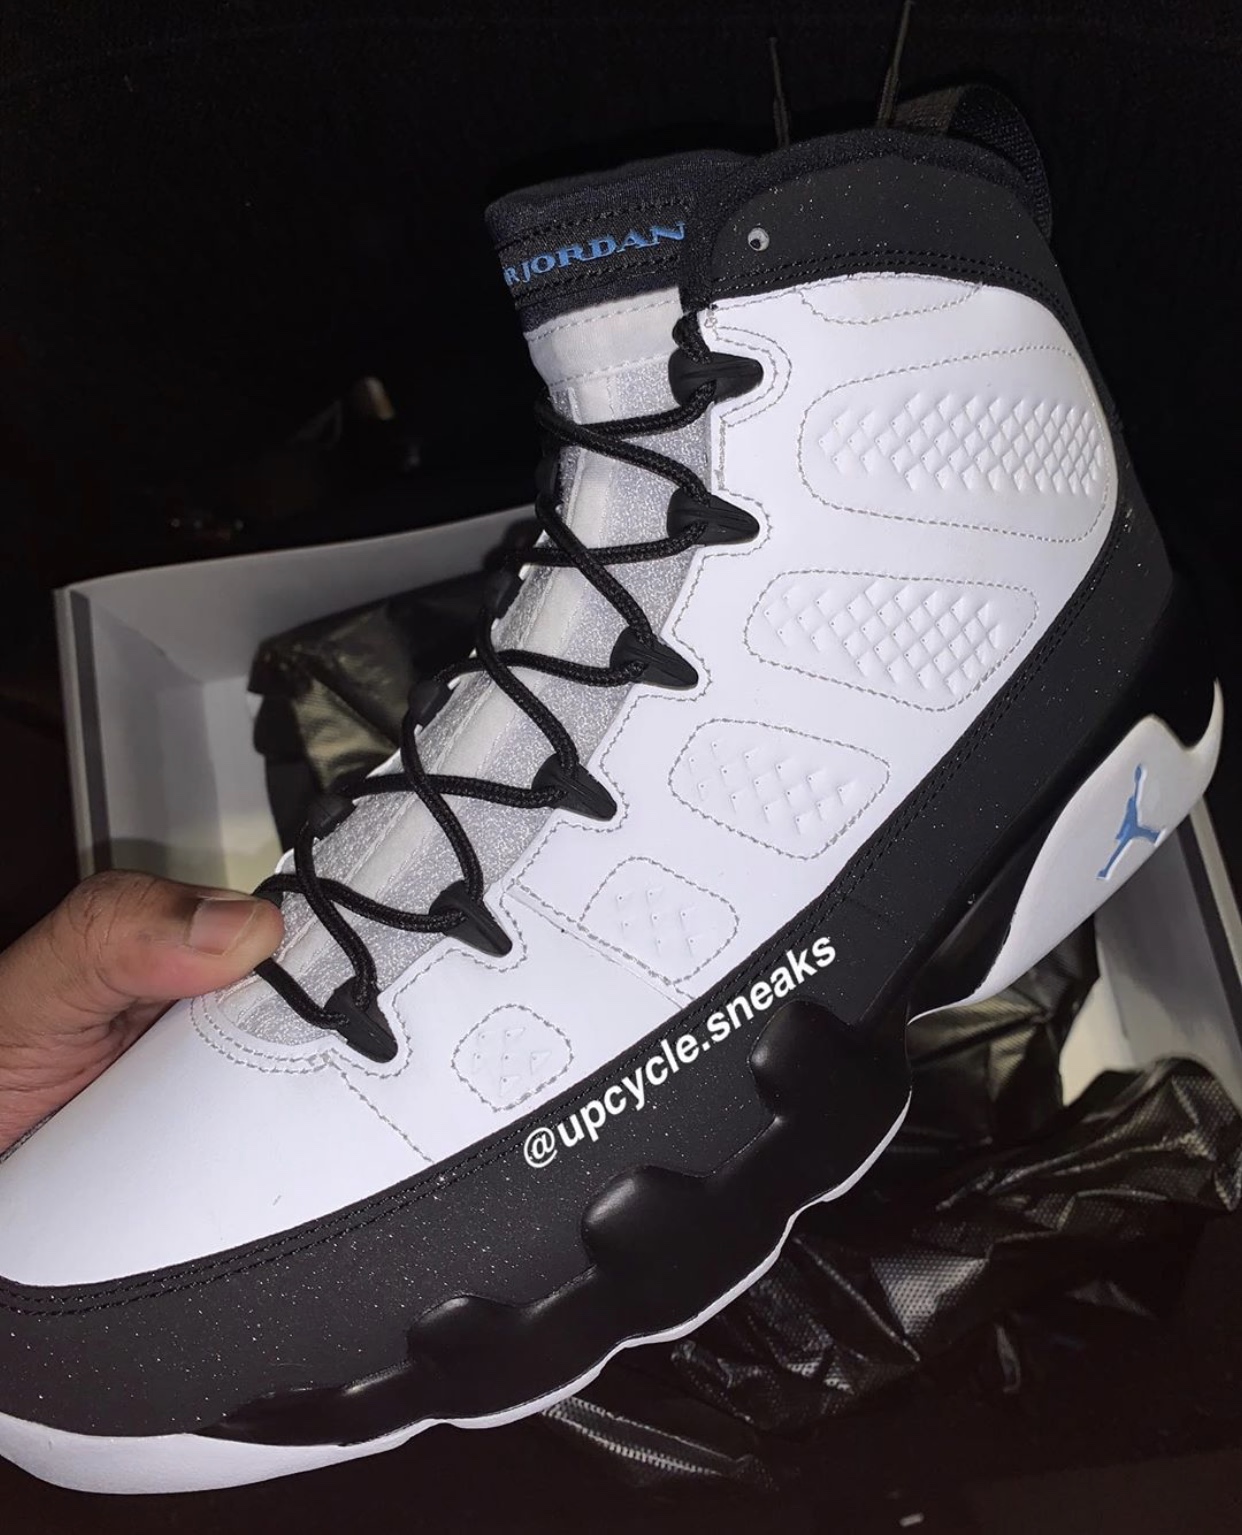 black and blue 9s 2020 release date